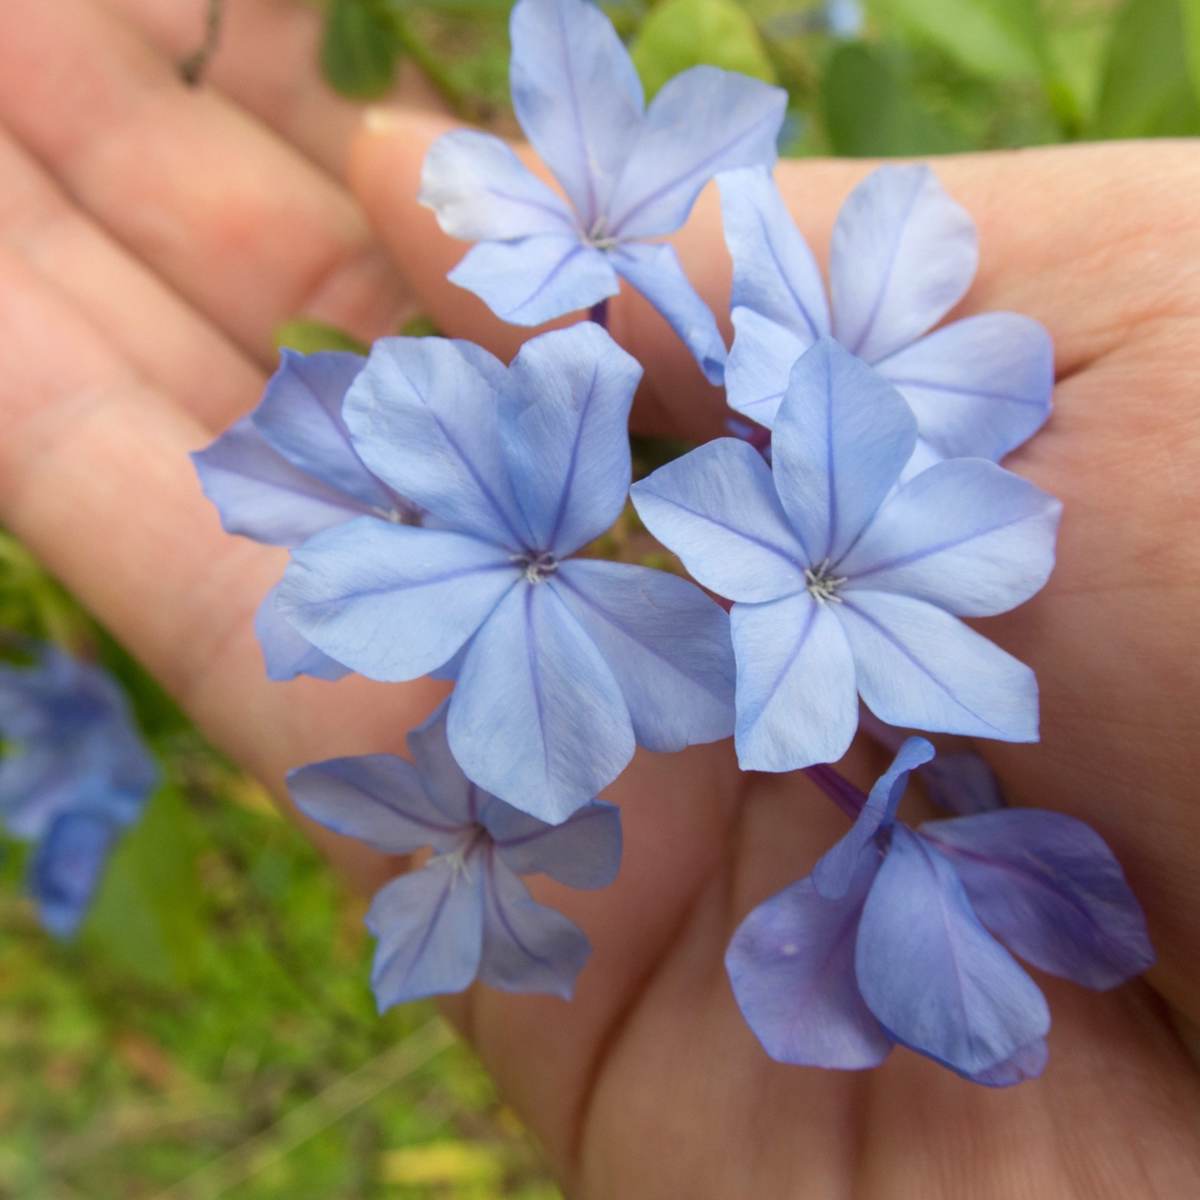 Blue plumbago flowers in a hand.